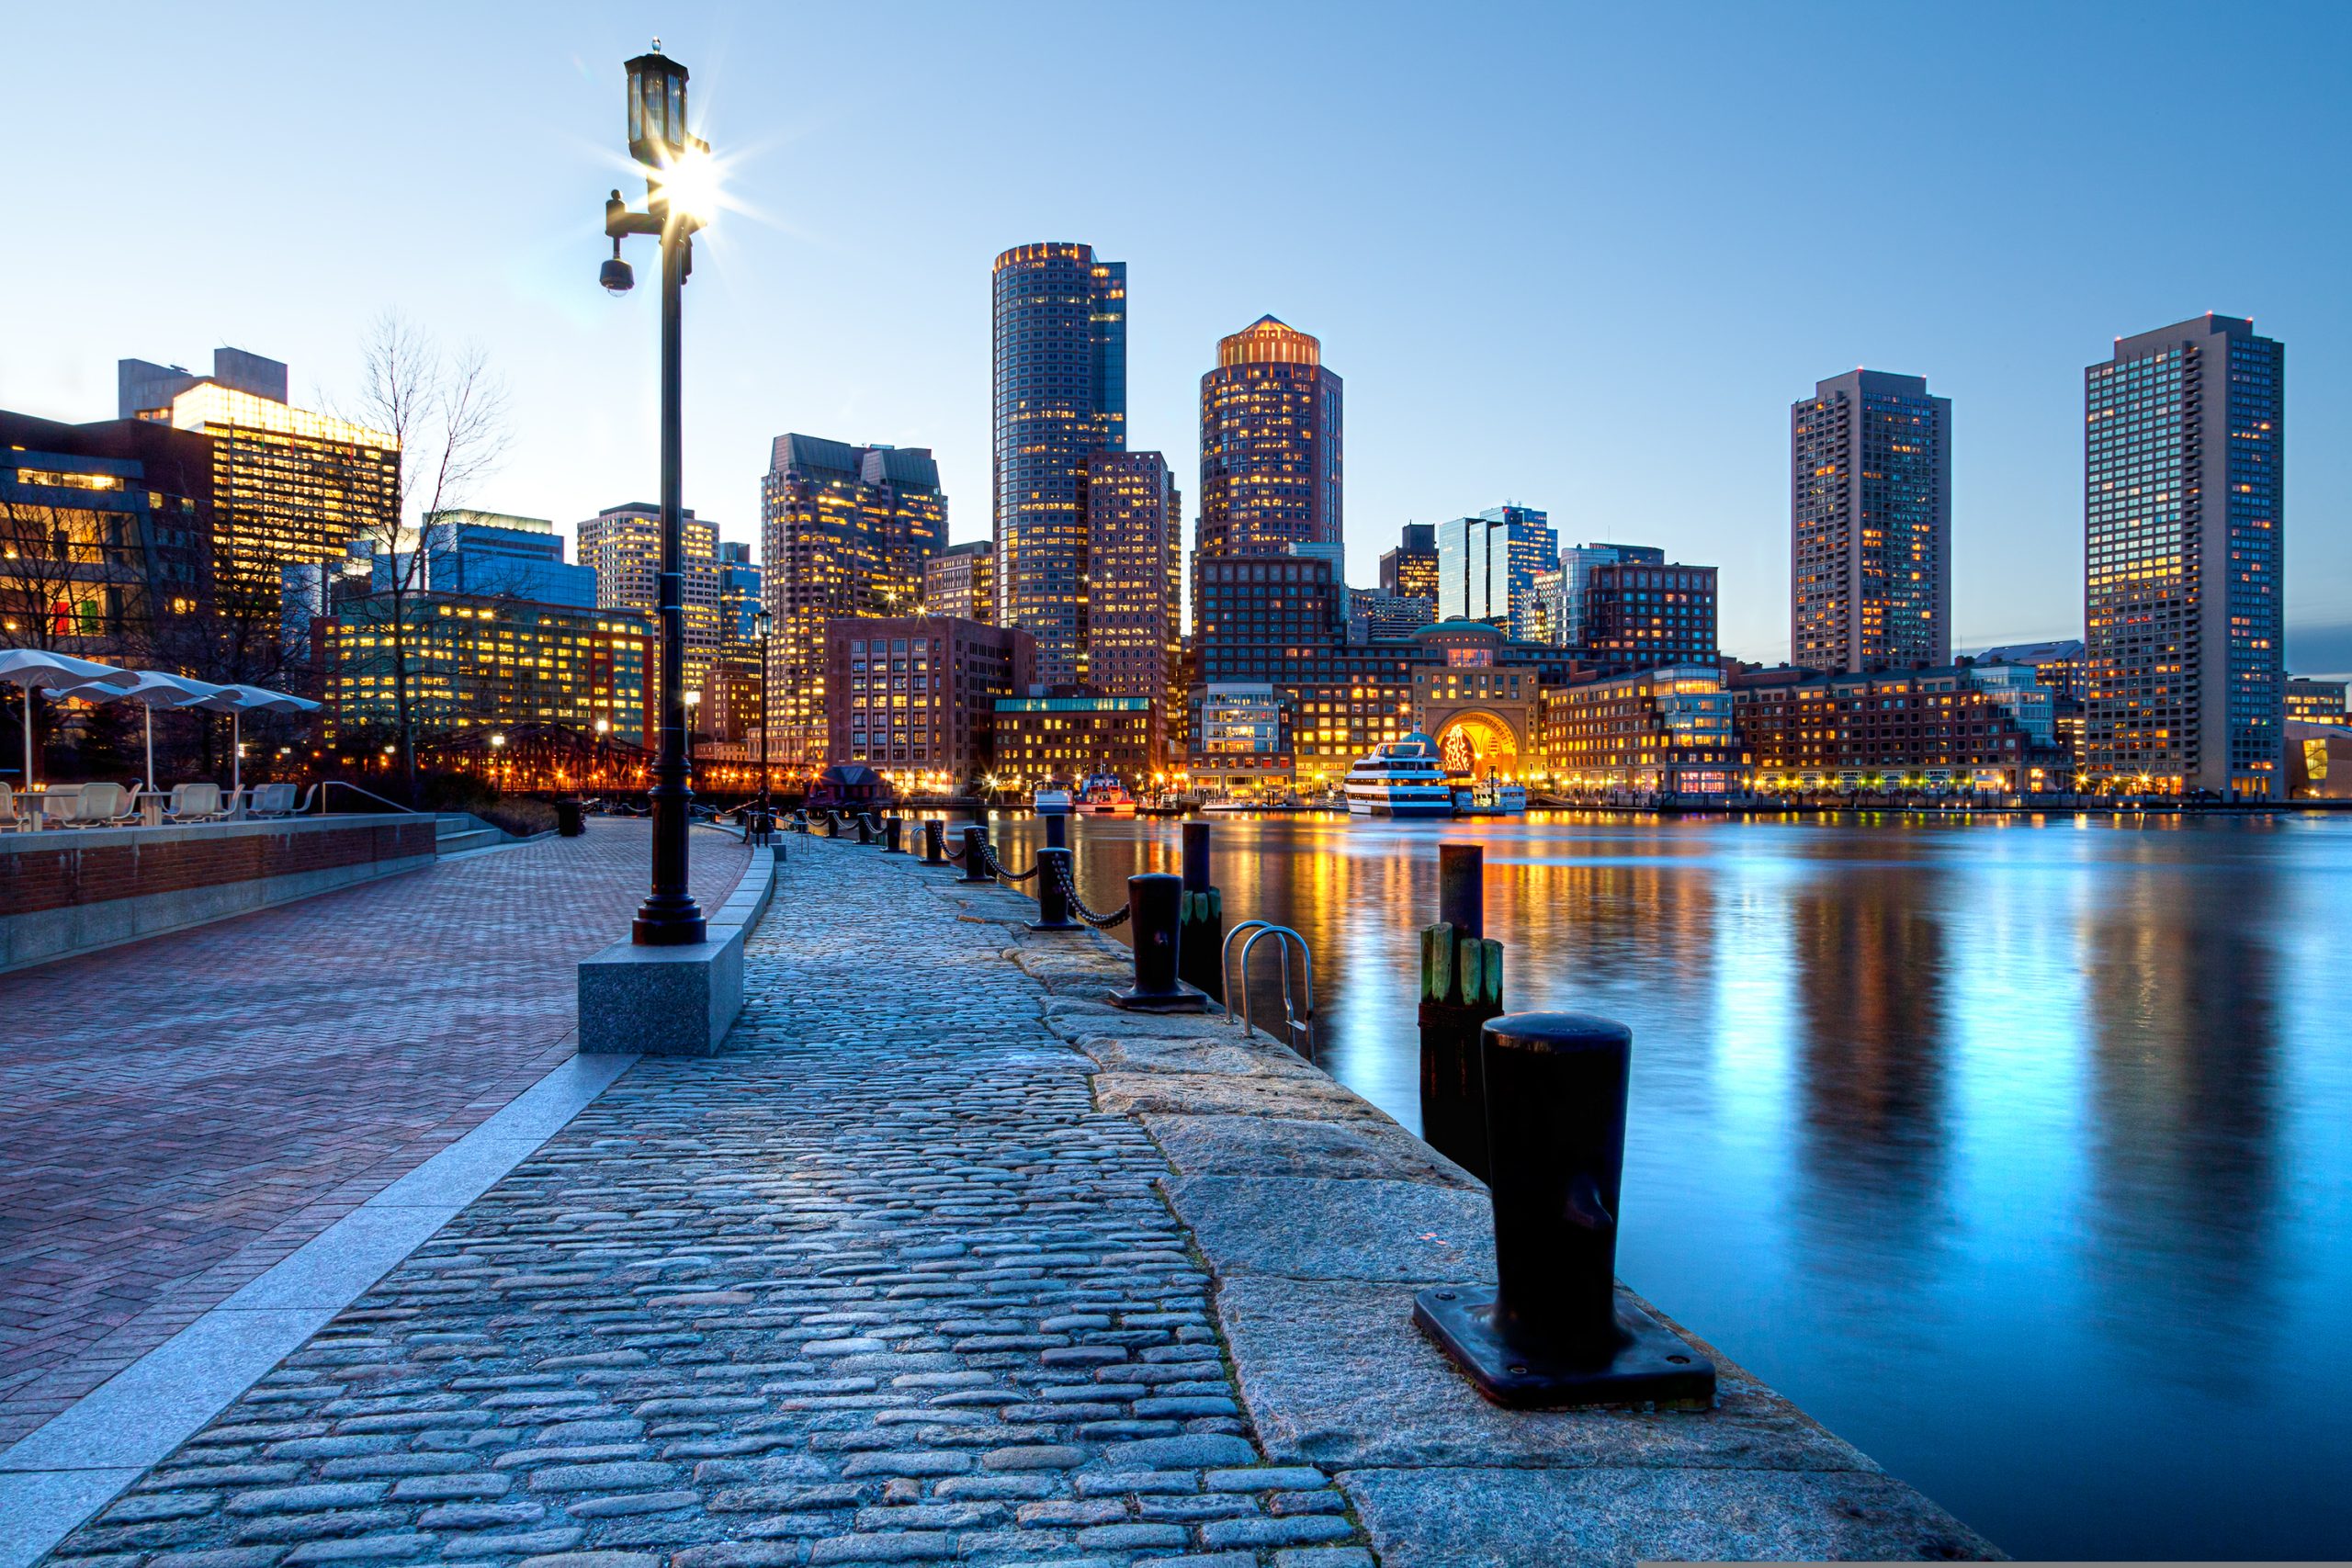 Boston,Harbor,And,Financial,District,At,Sunset,In,Boston,,Massachusetts.